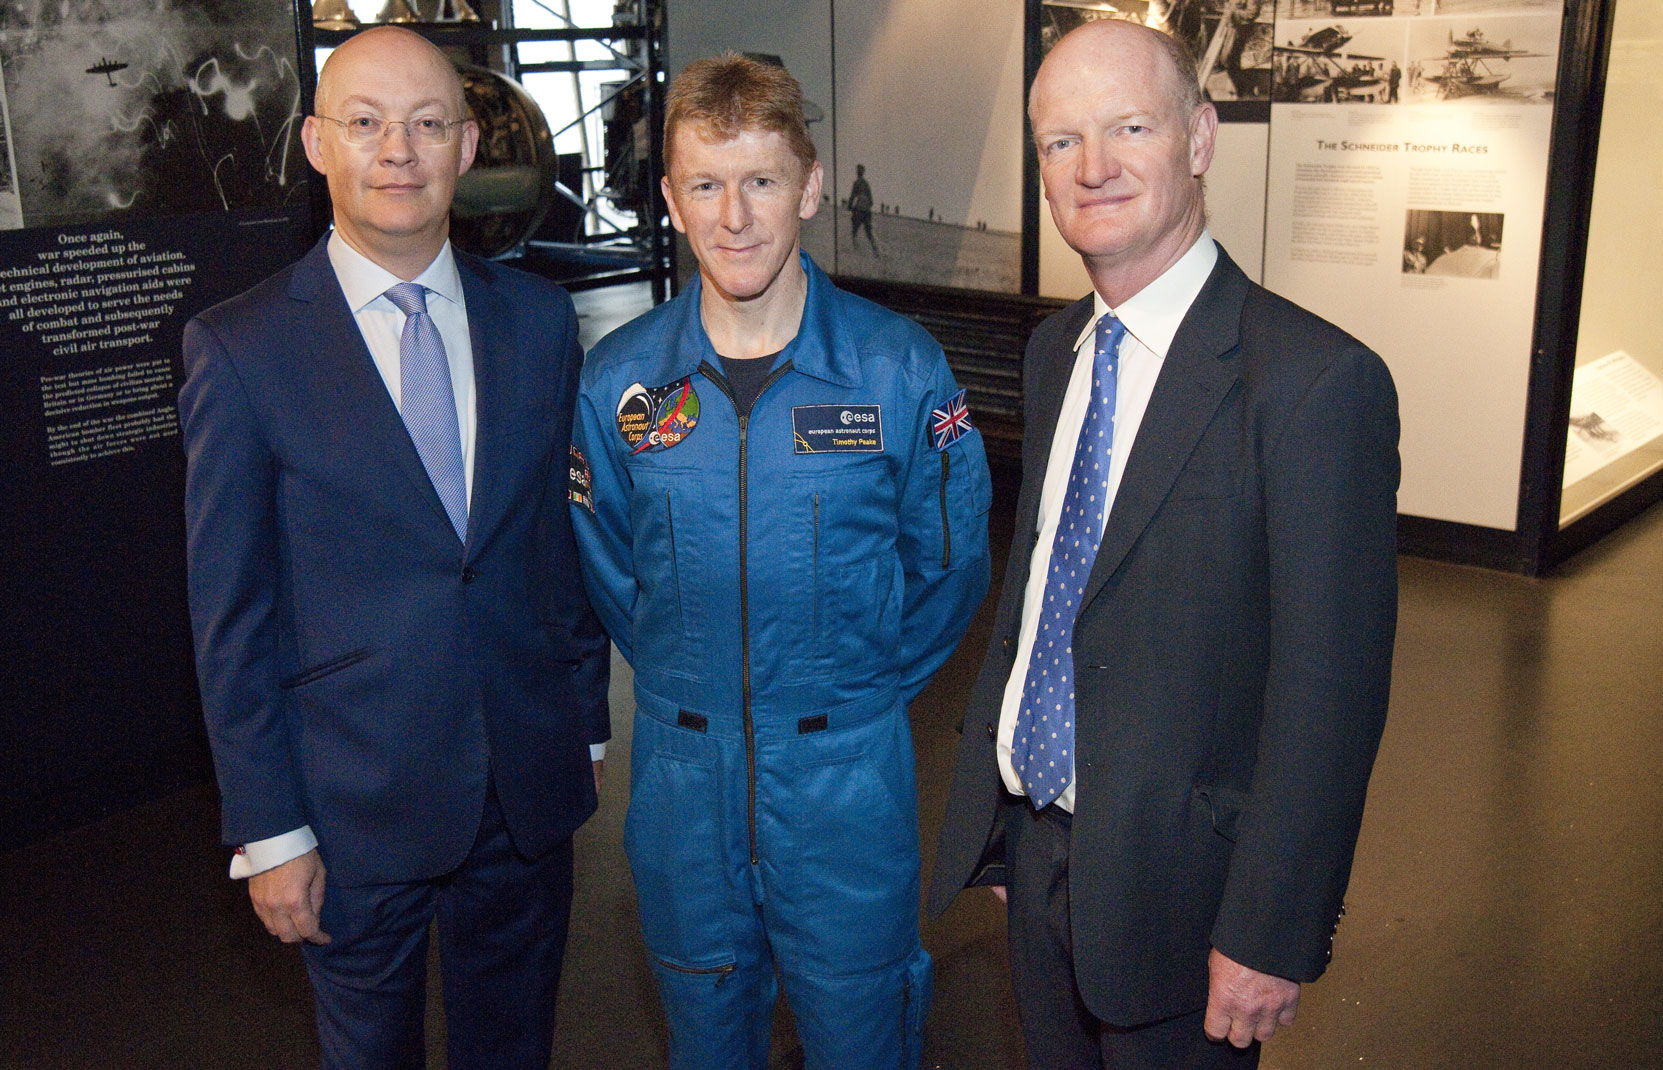 Ian Blatchford, Science Museum Director (l) welcomes Tim Peake and Science Minister David Willetts (r) to the Museum. Image: Science Museum